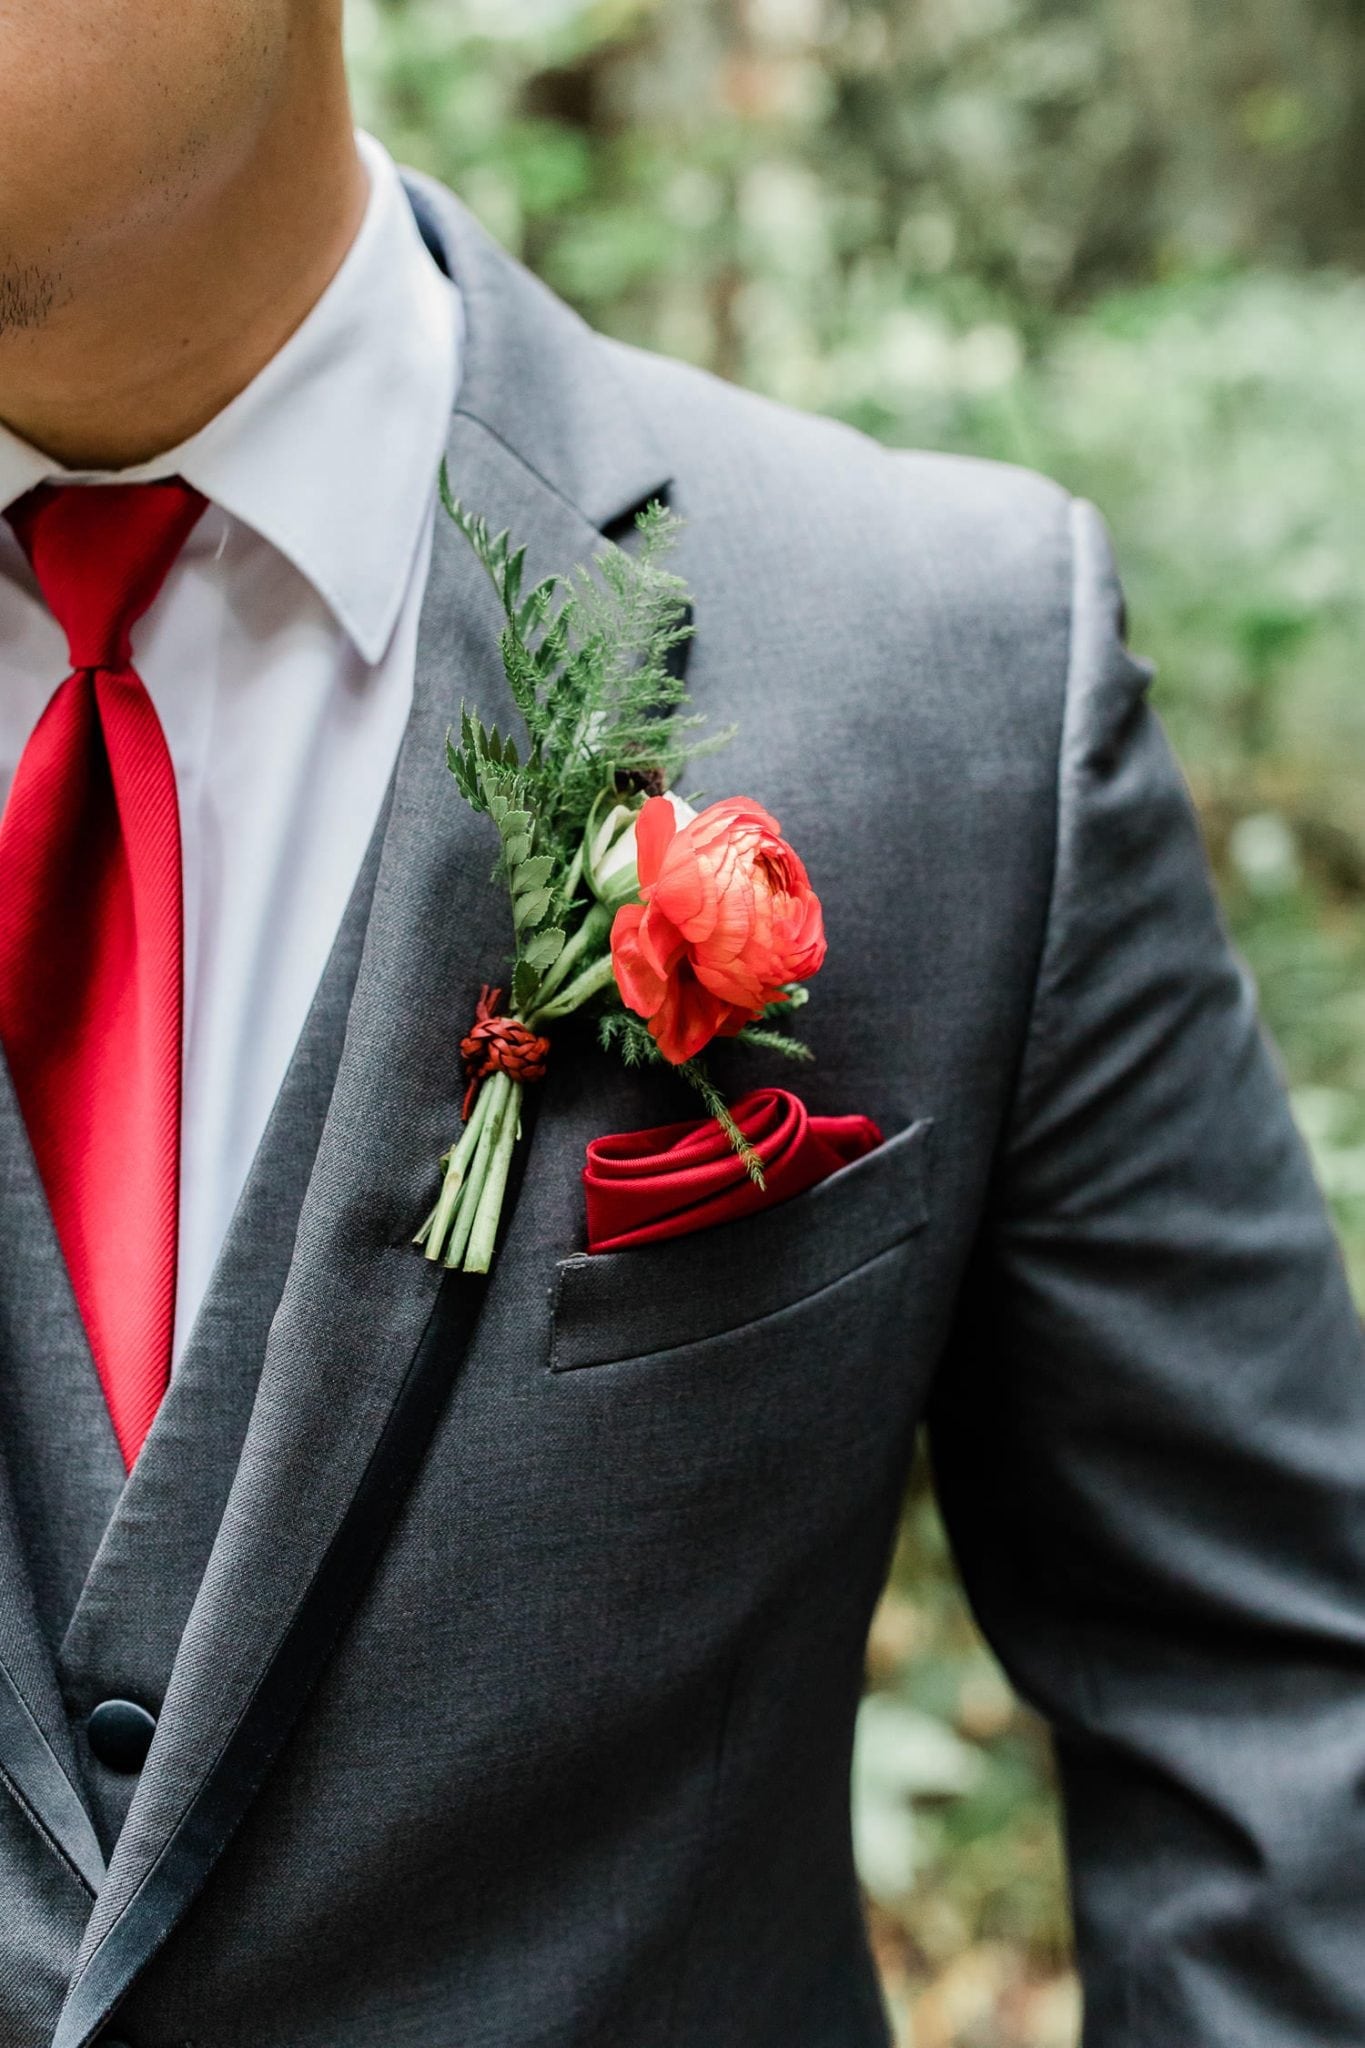 Groomsman with rustic boutonniere | Vancouver wedding photographer